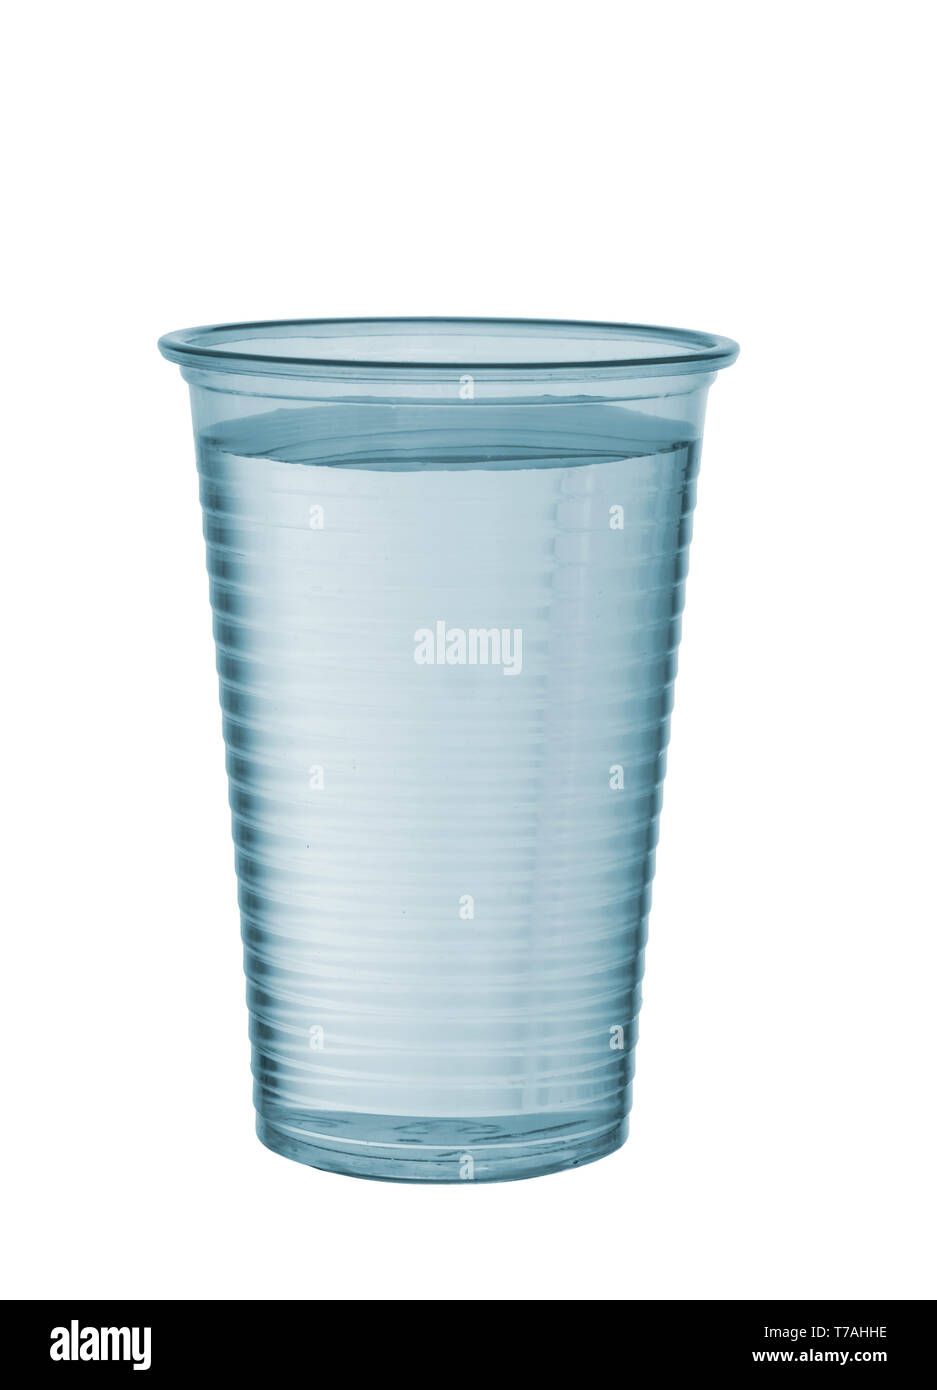 https://c8.alamy.com/comp/T7AHHE/plastic-cup-of-water-isolated-on-white-background-blue-T7AHHE.jpg